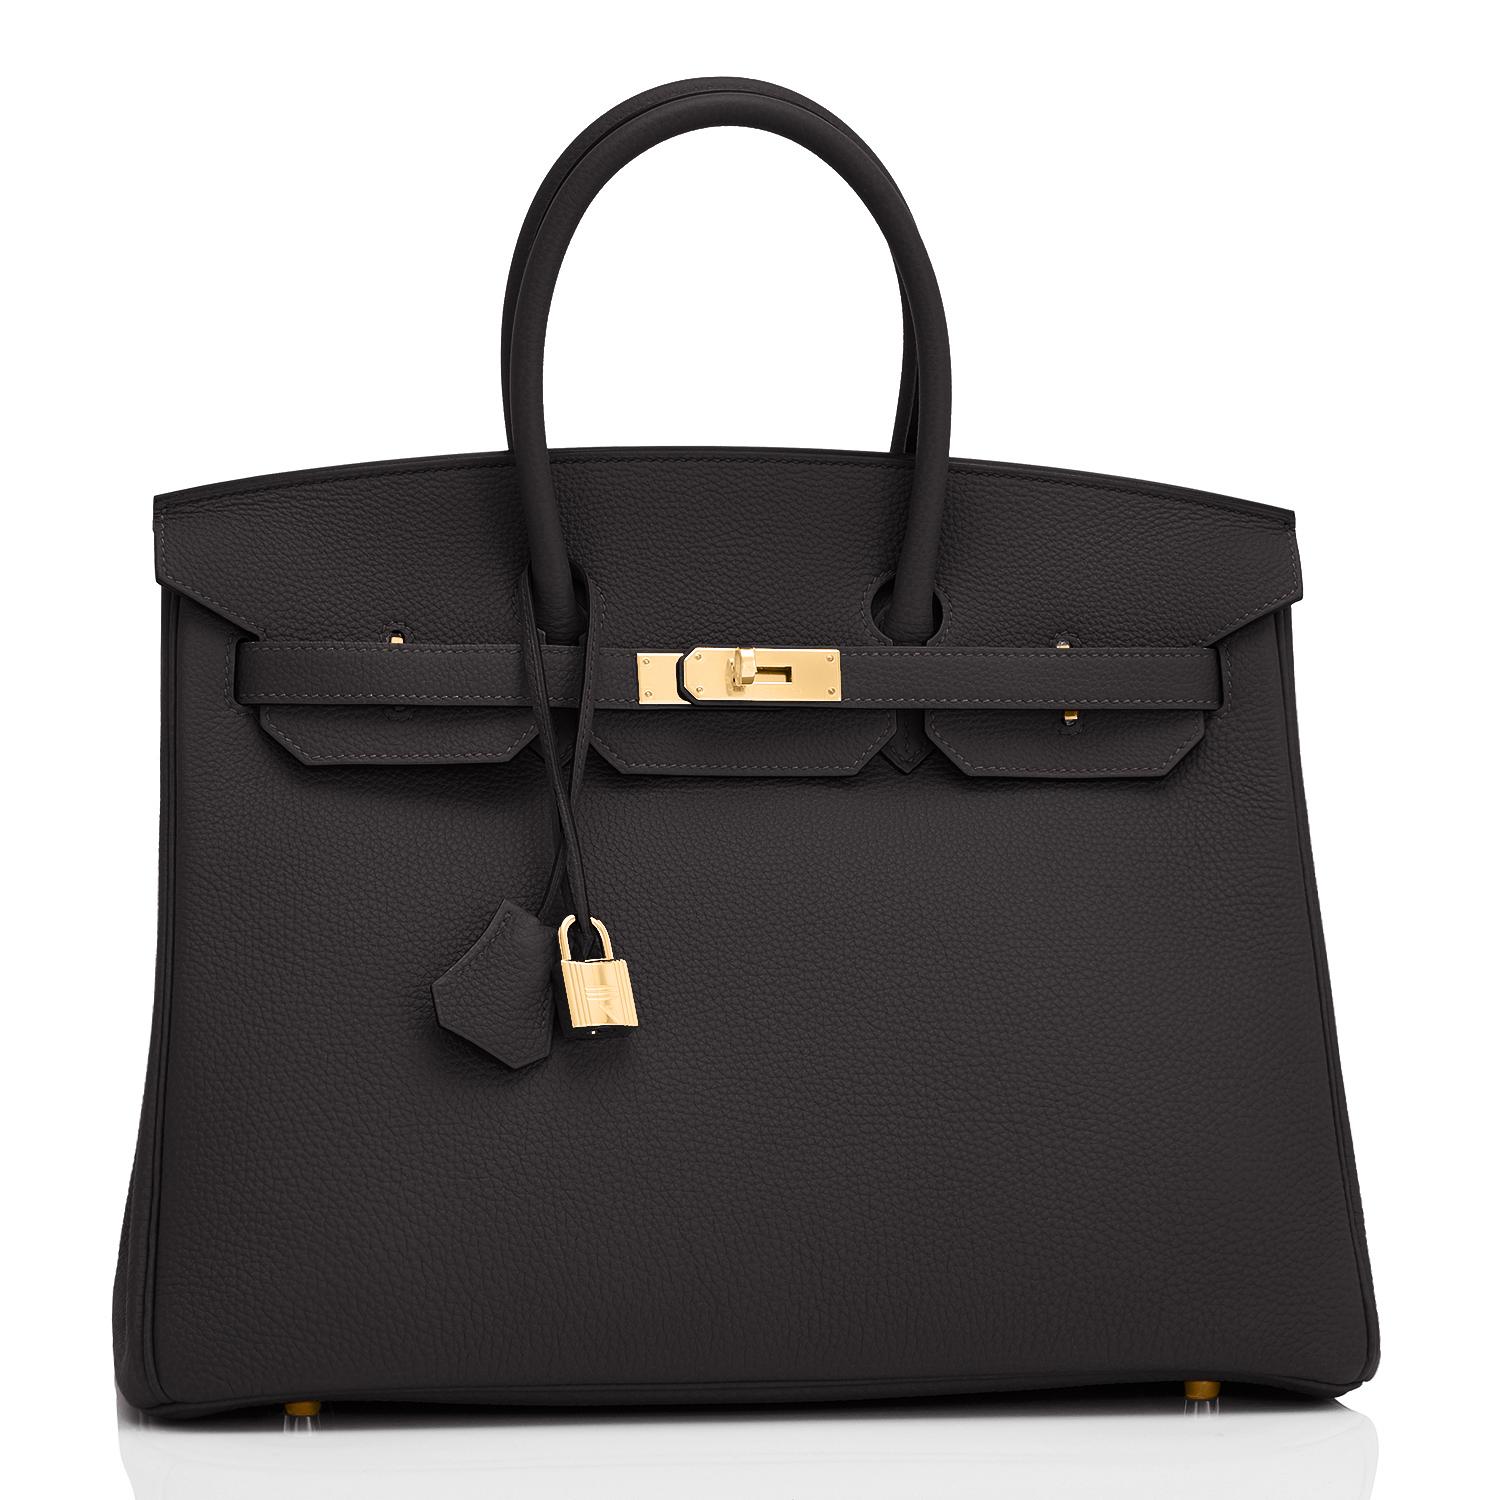 Hermes Black Togo 35cm Birkin Gold Hardware Power Birkin Y Stamp, 2020
Brand New in Box. Store fresh. Pristine Condition (with plastic on hardware).
Just purchased from Hermes store; bag bears new 2020 interior Y stamp.
Perfect gift! Comes with